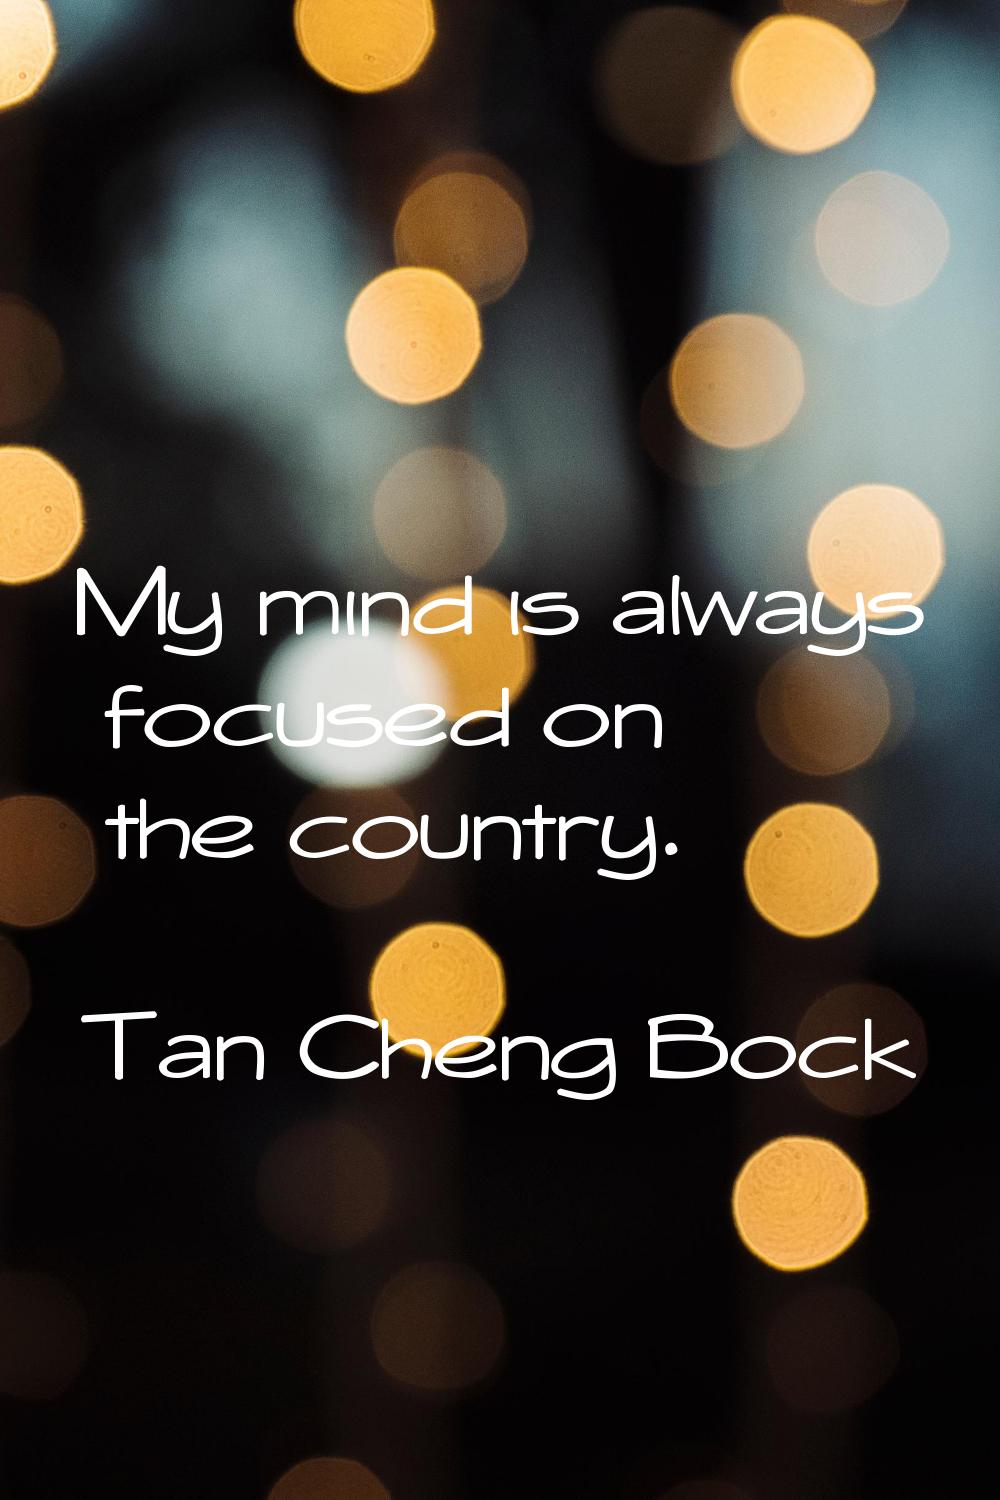 My mind is always focused on the country.